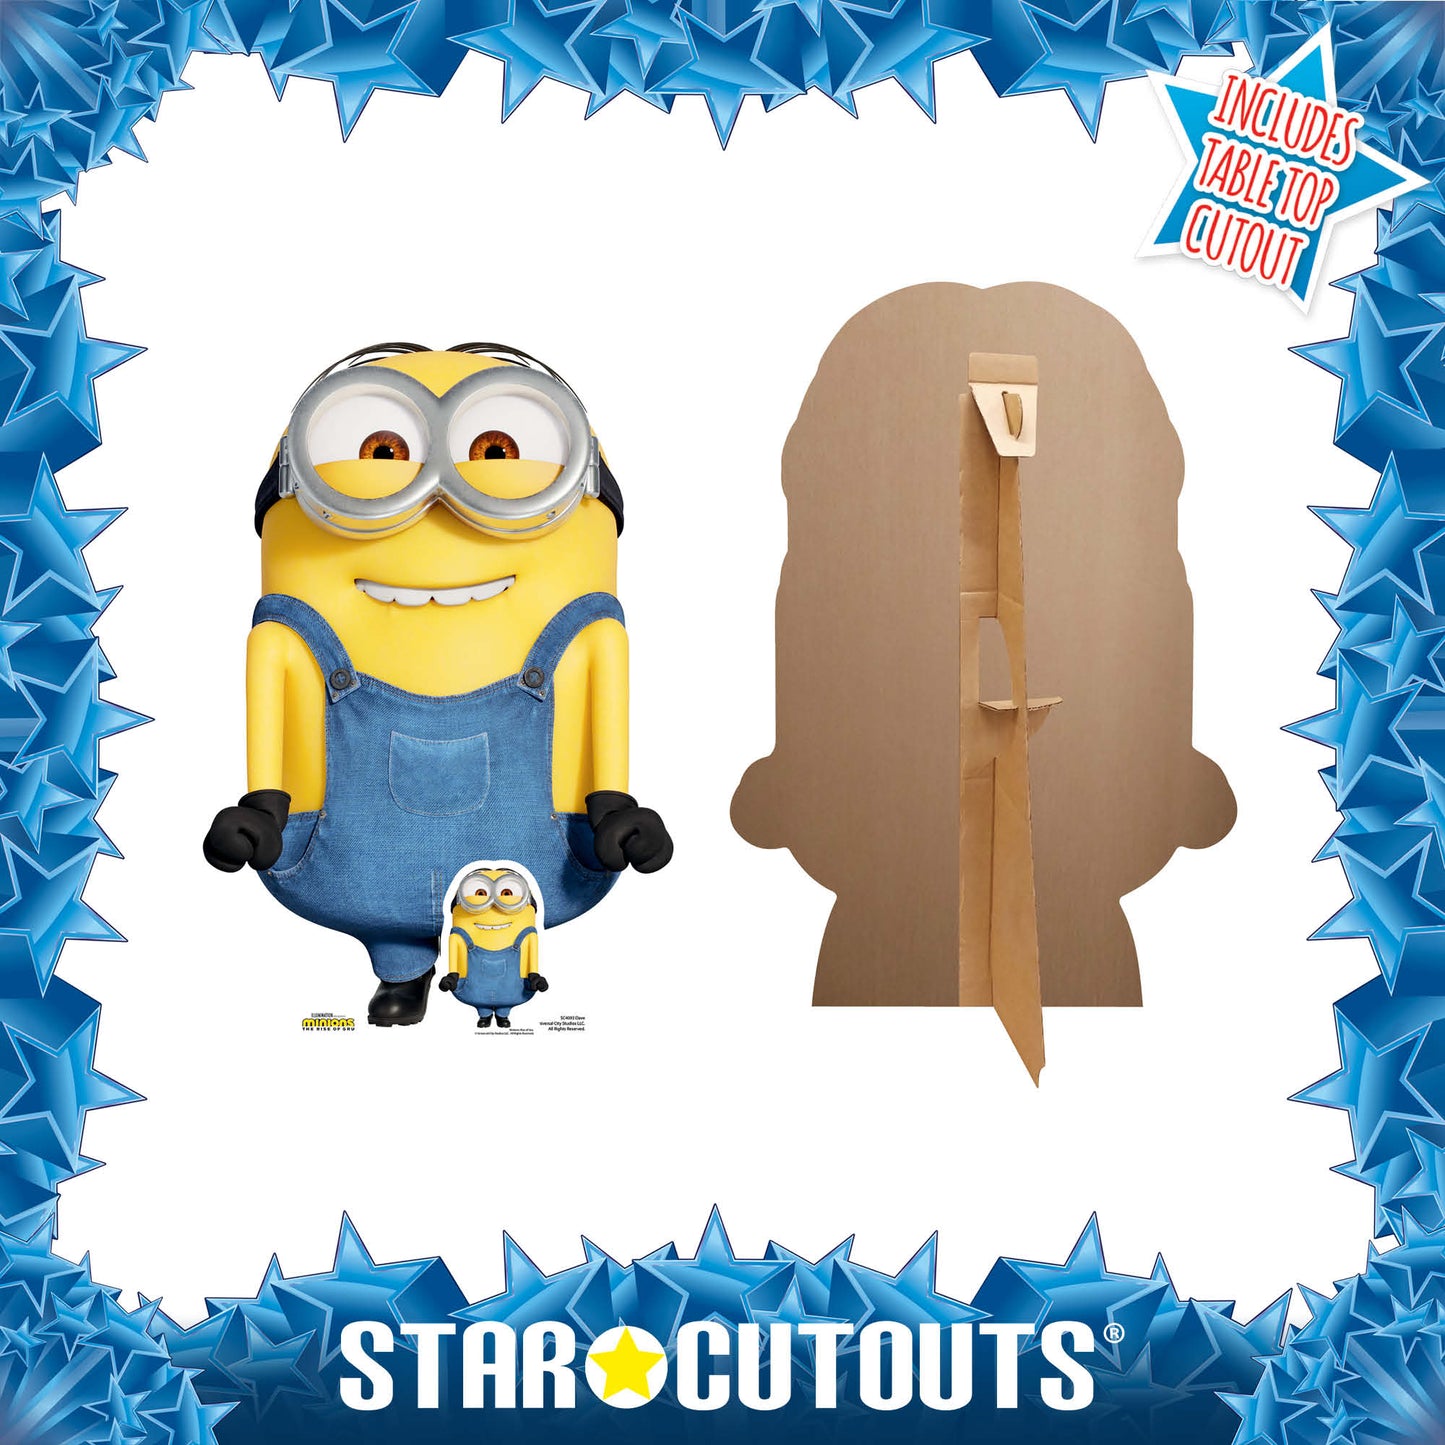 Dave Excited Minions 2 Despicable Me and Minions Cardboard Cutout